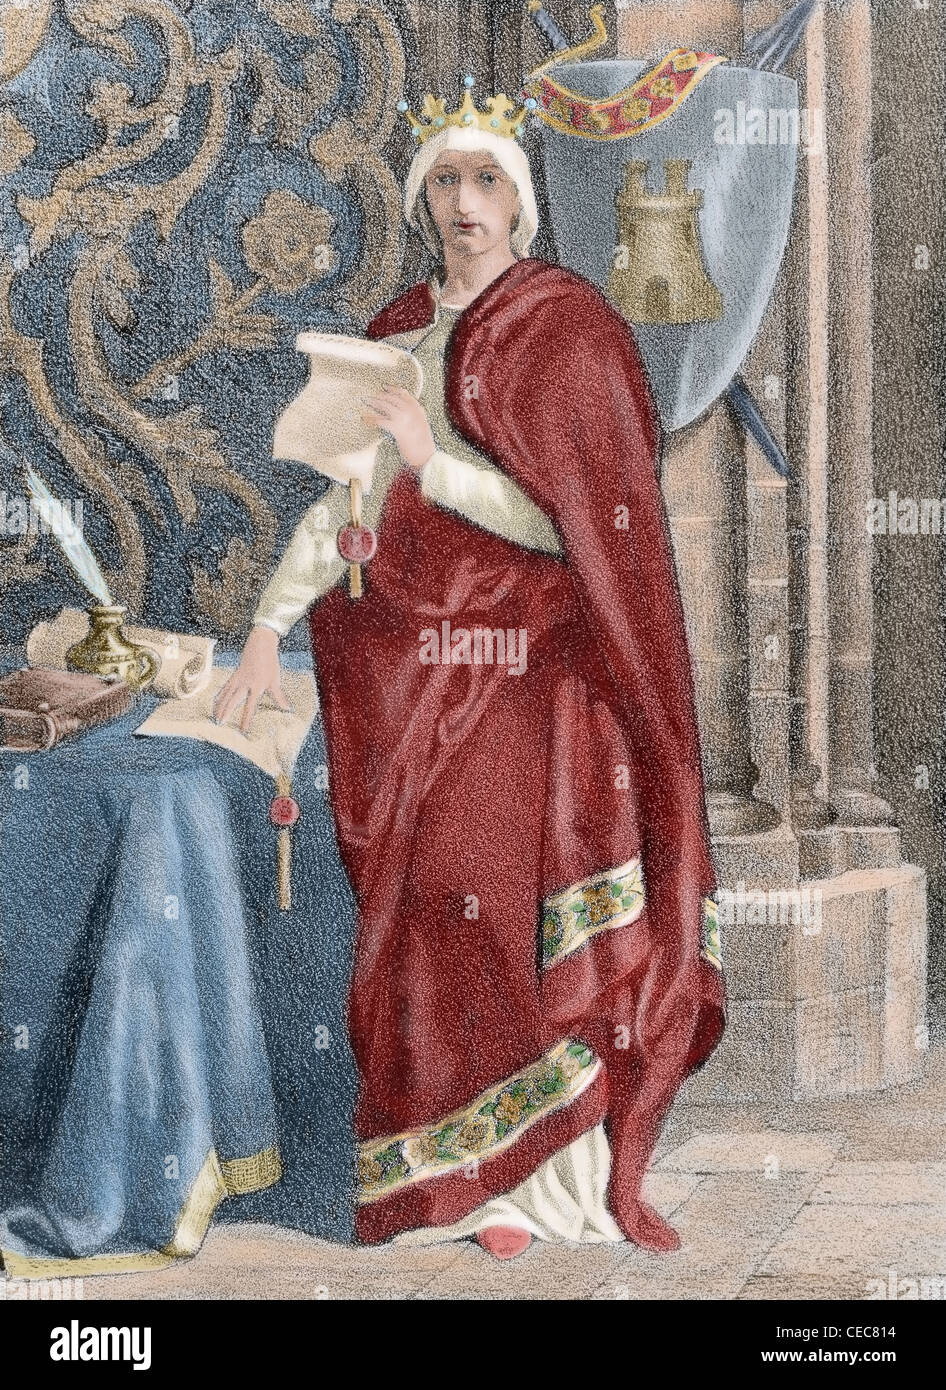 María de Molina (c. 1265-1321). Queen consort of Castile and León from 1284 to 1295 and regent. Colored engraving. Stock Photo